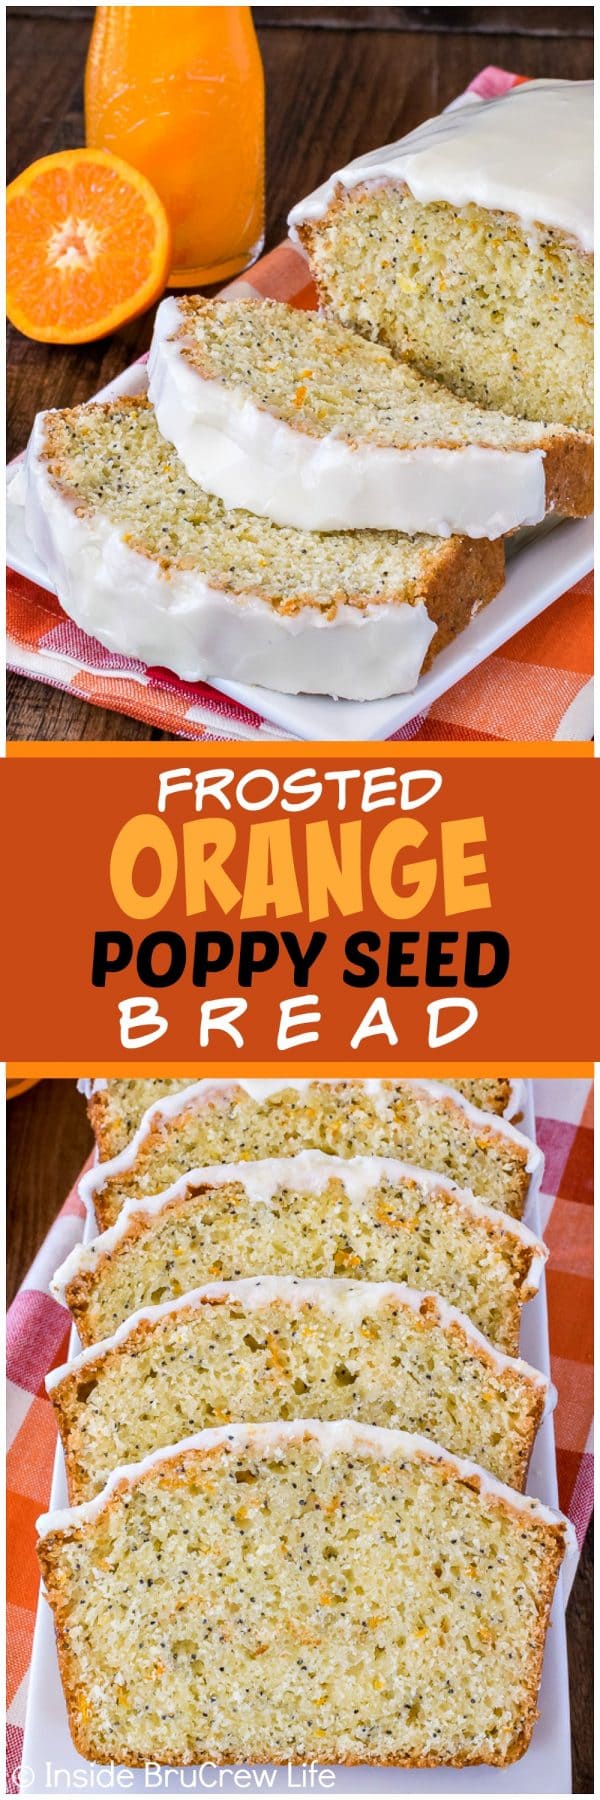 Frosted Orange Poppy Seed Bread - sweet orange frosting and poppy seeds add a fun twist to these sweet bread! Great recipe for a summer breakfast!